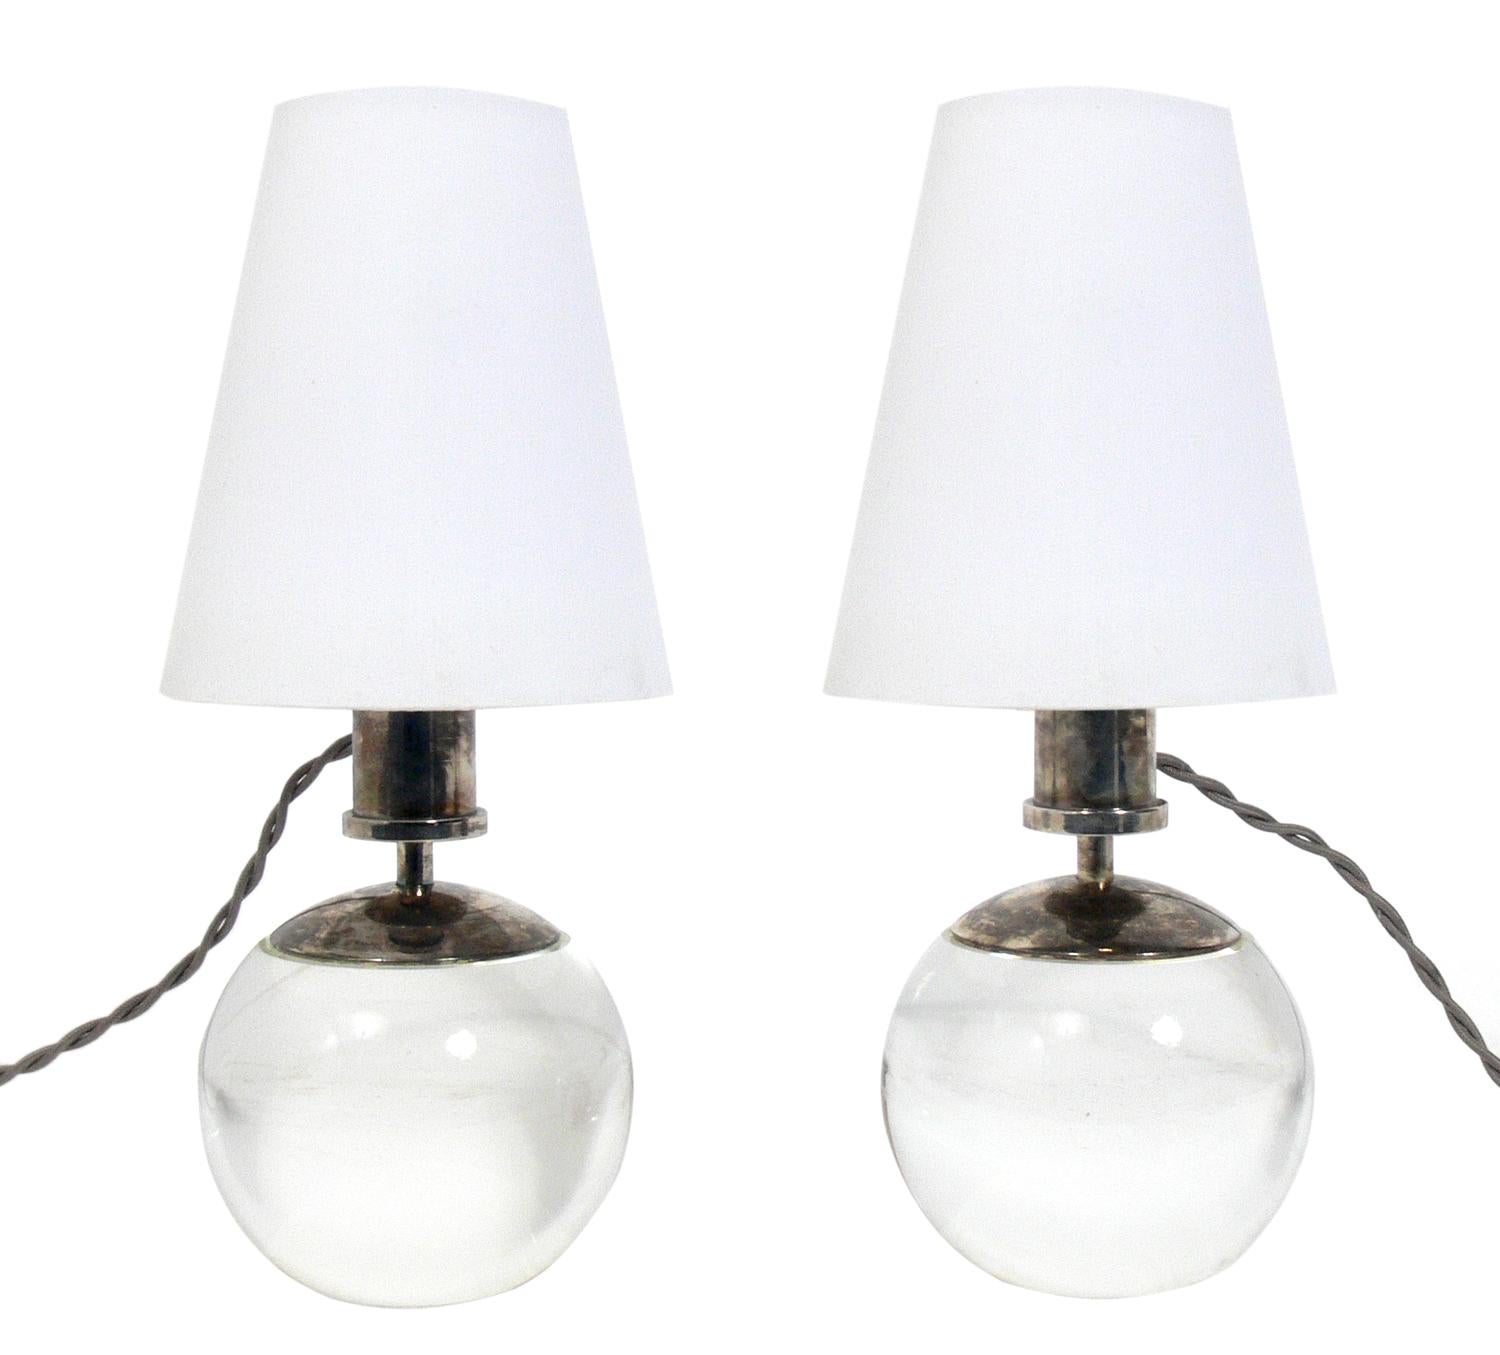 French Art Deco Style Lamps in the Manner of Jacques Adnet